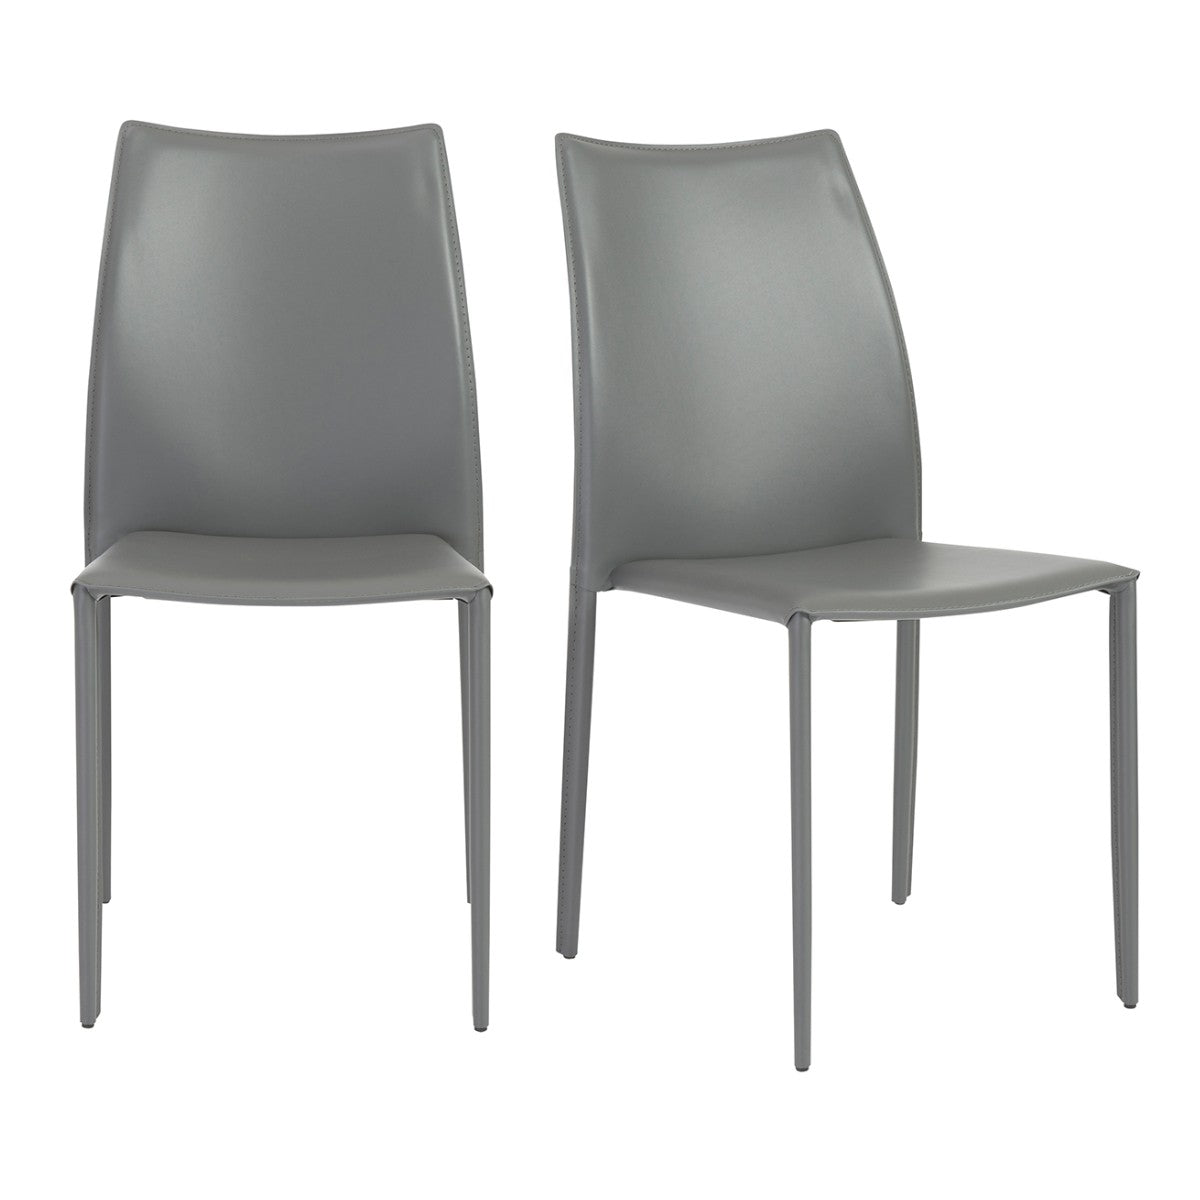 Set of Two Premium All Light Gray Stacking Dining Chairs